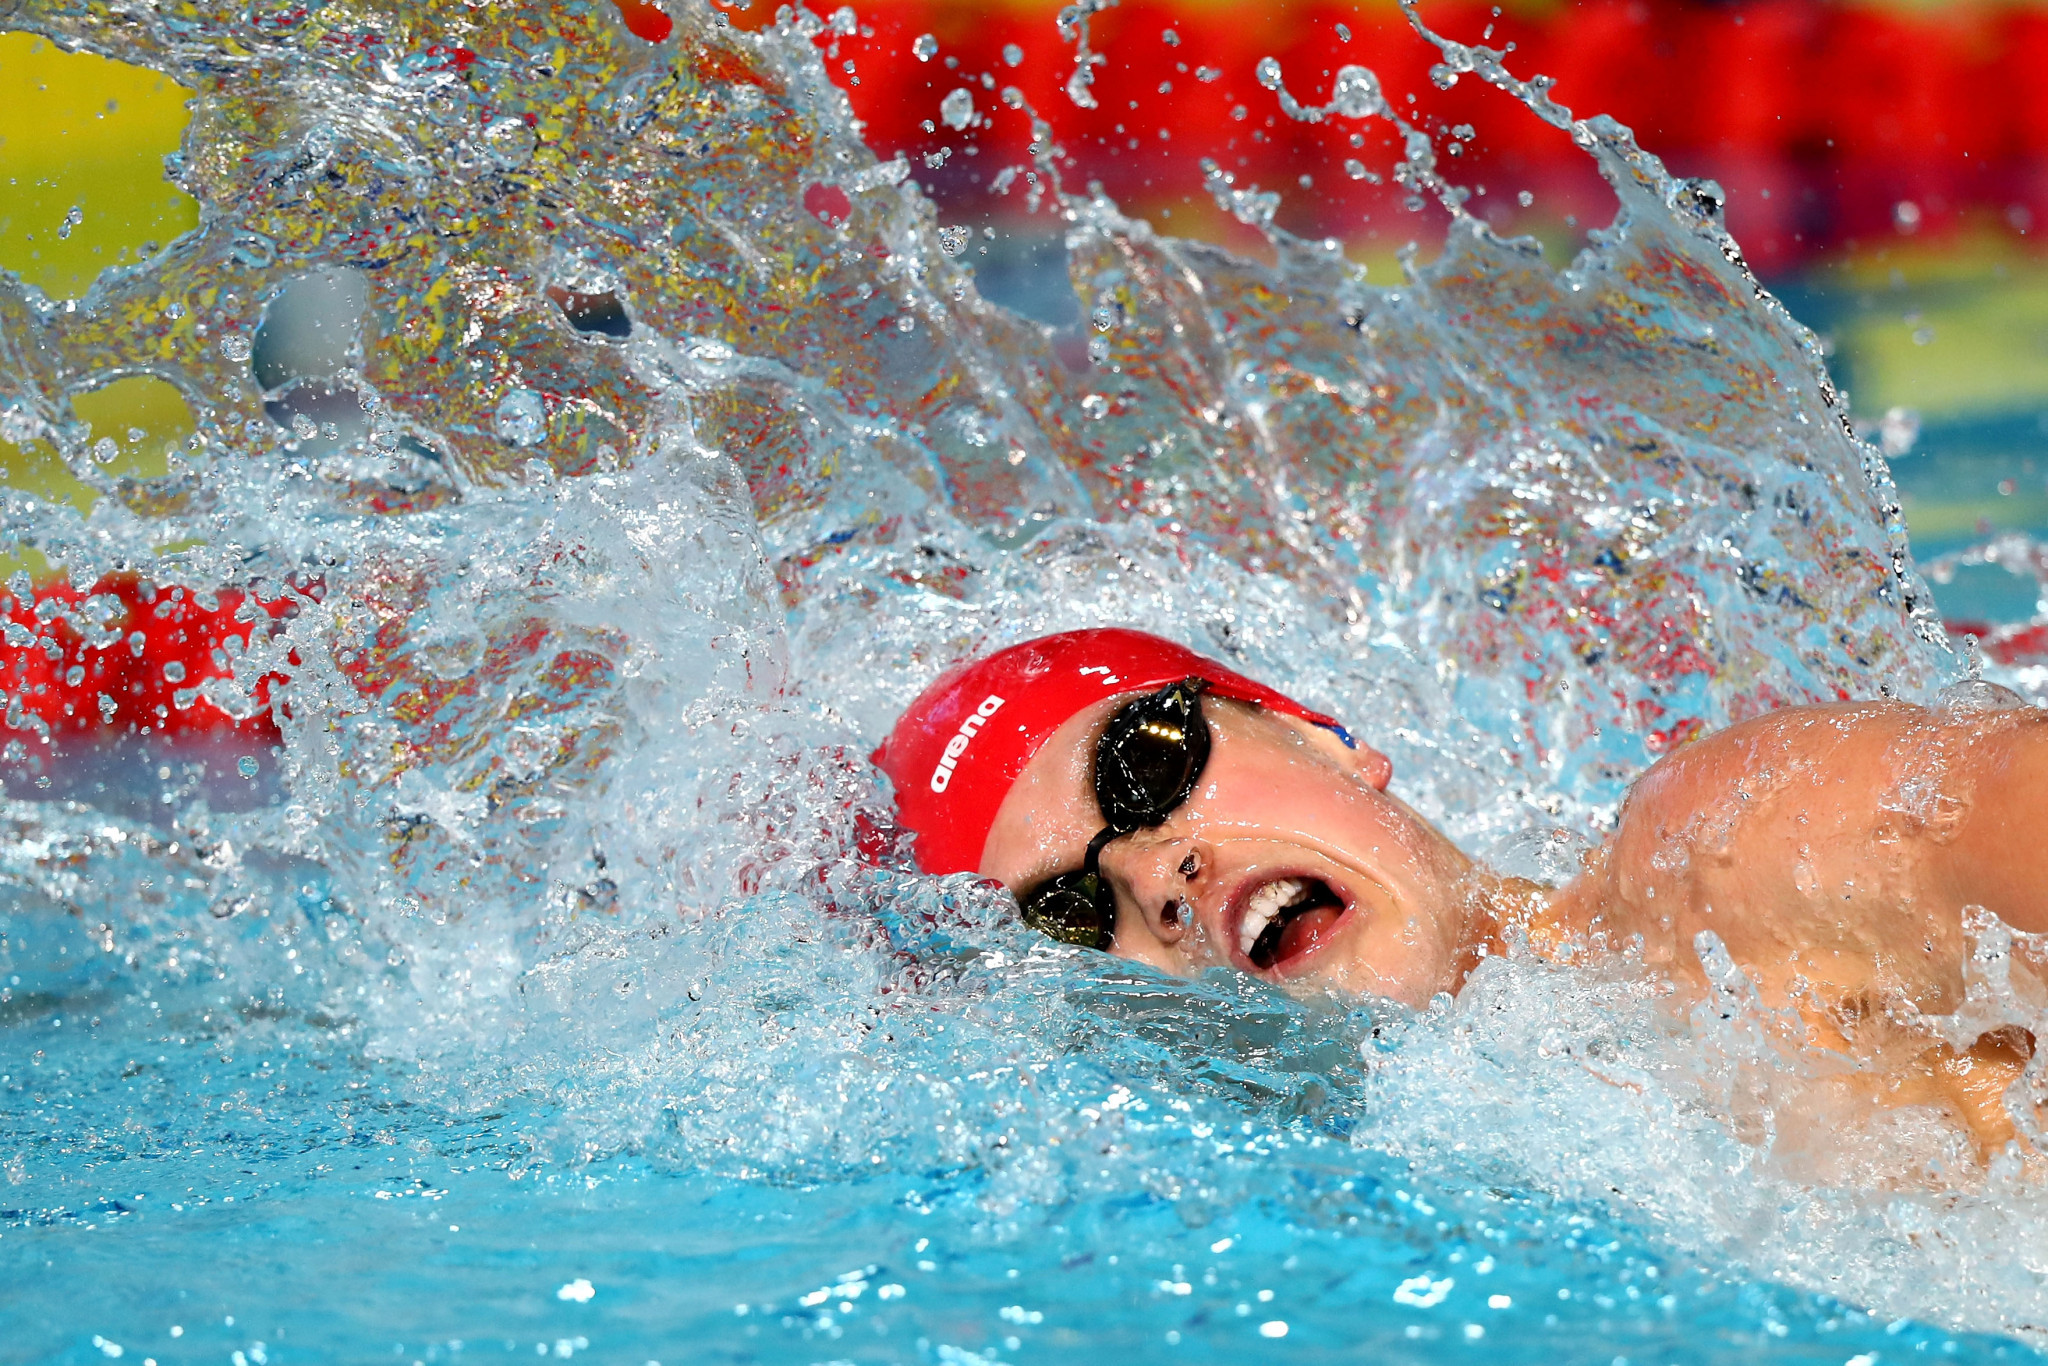 Thomas Hamer was also in record-breaking form as he claimed gold in the men's 200m freestyle S14 ©Getty Images